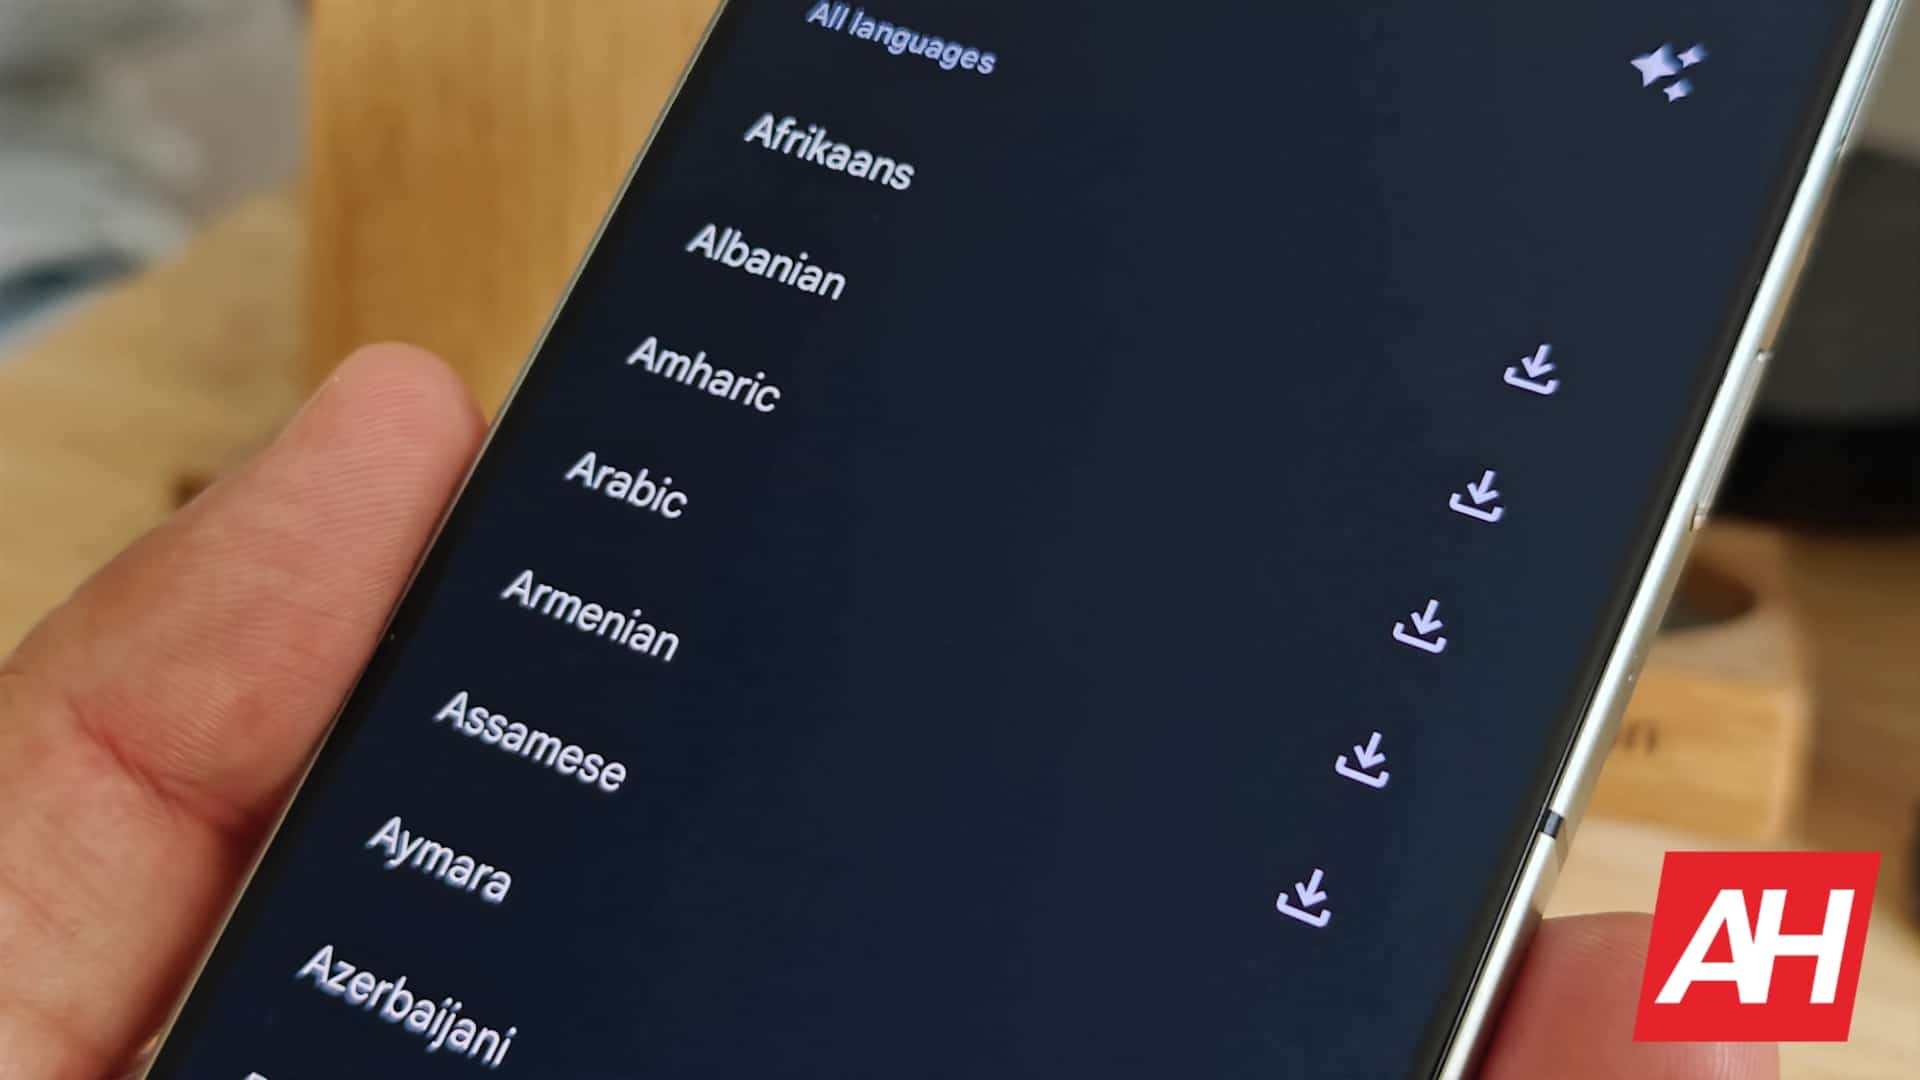 Google Translate now supports more than 110 new languages